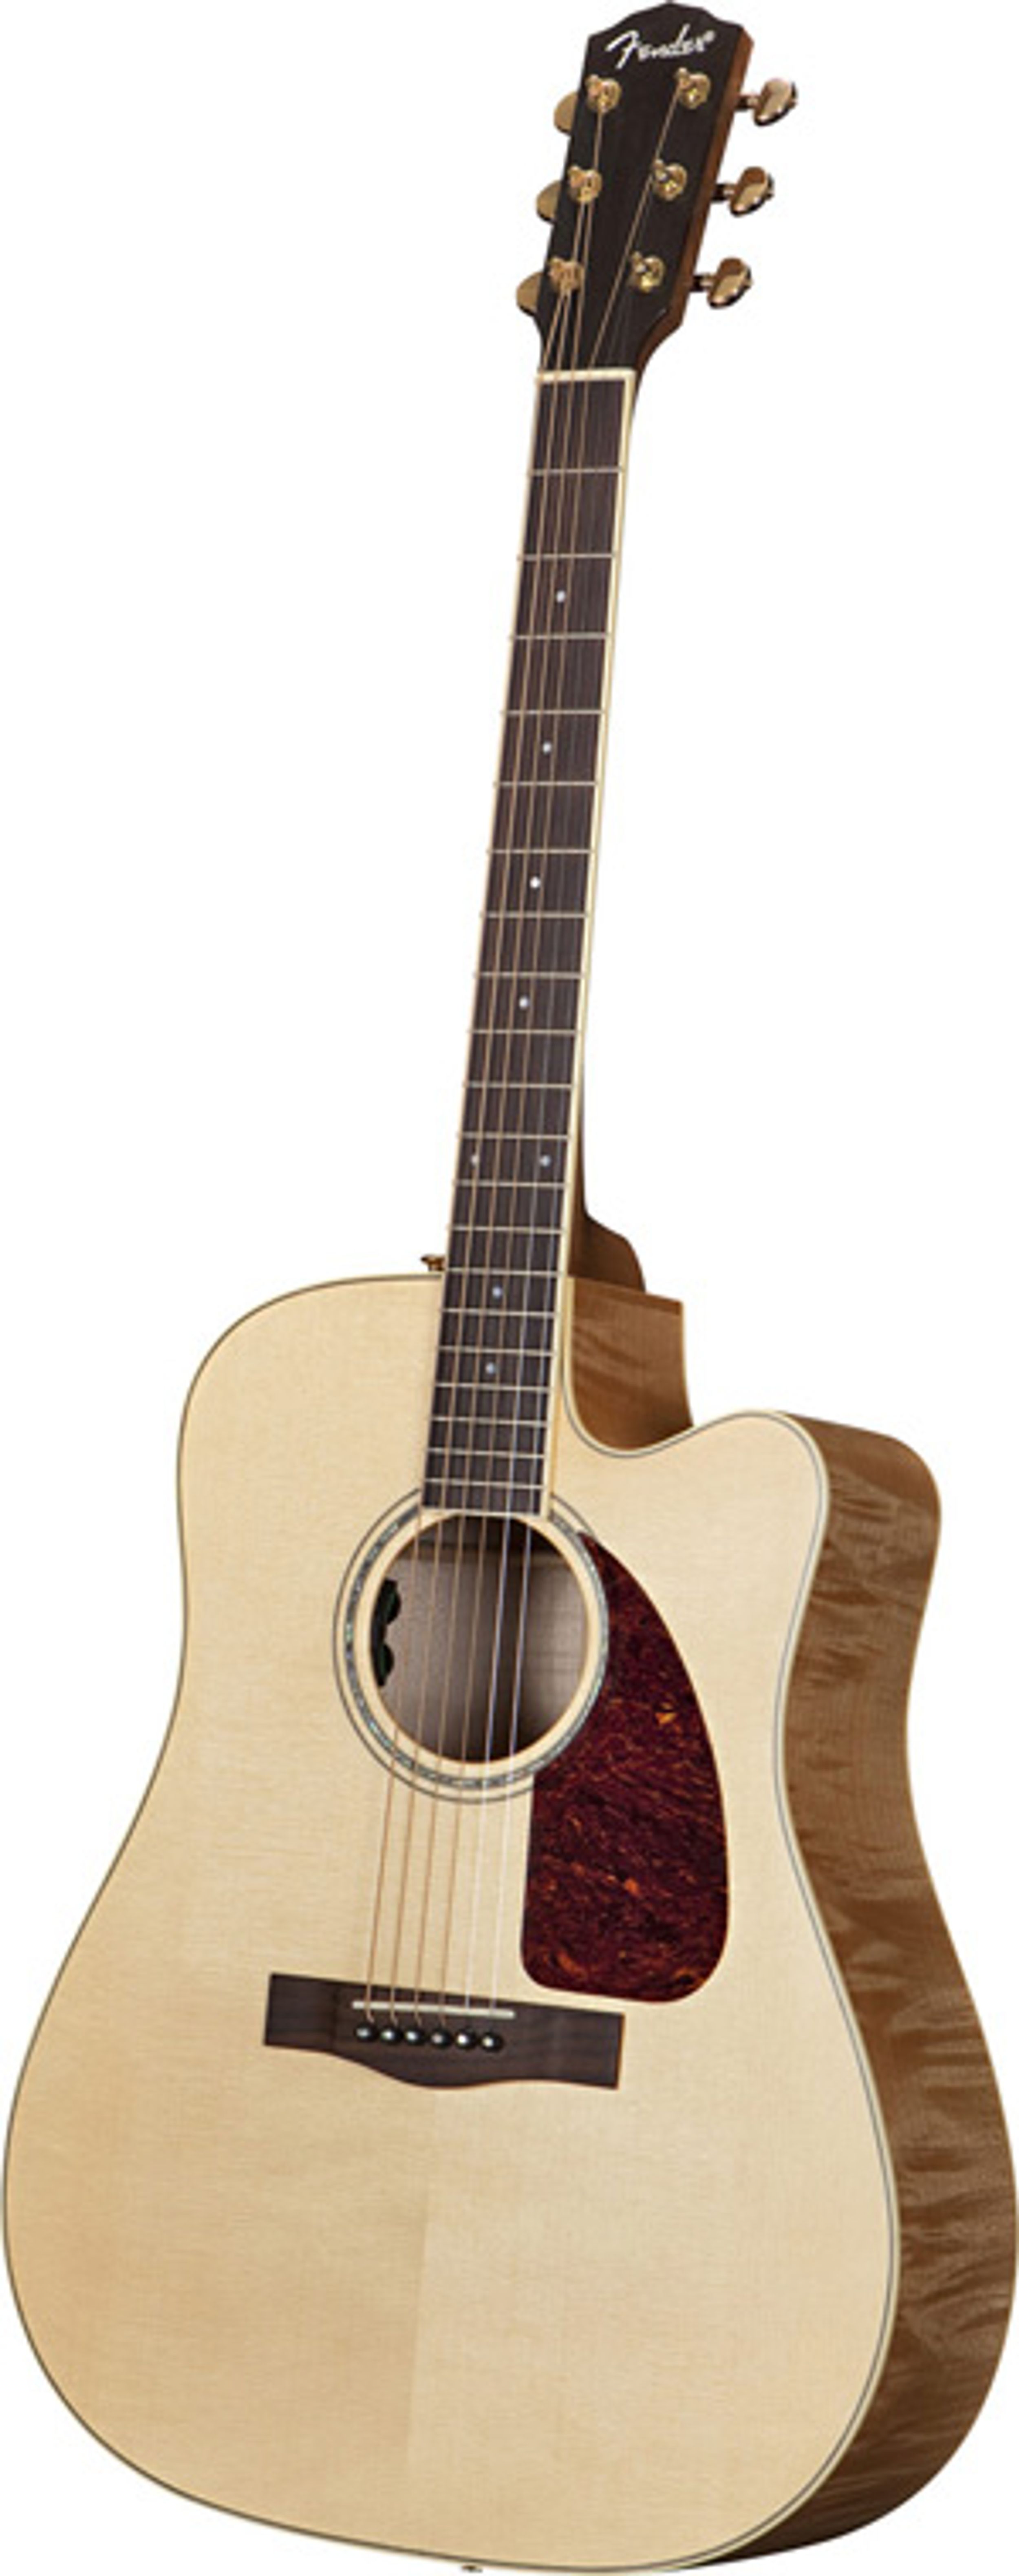 Fender Introduces New Acoustics, Including USA Select 1